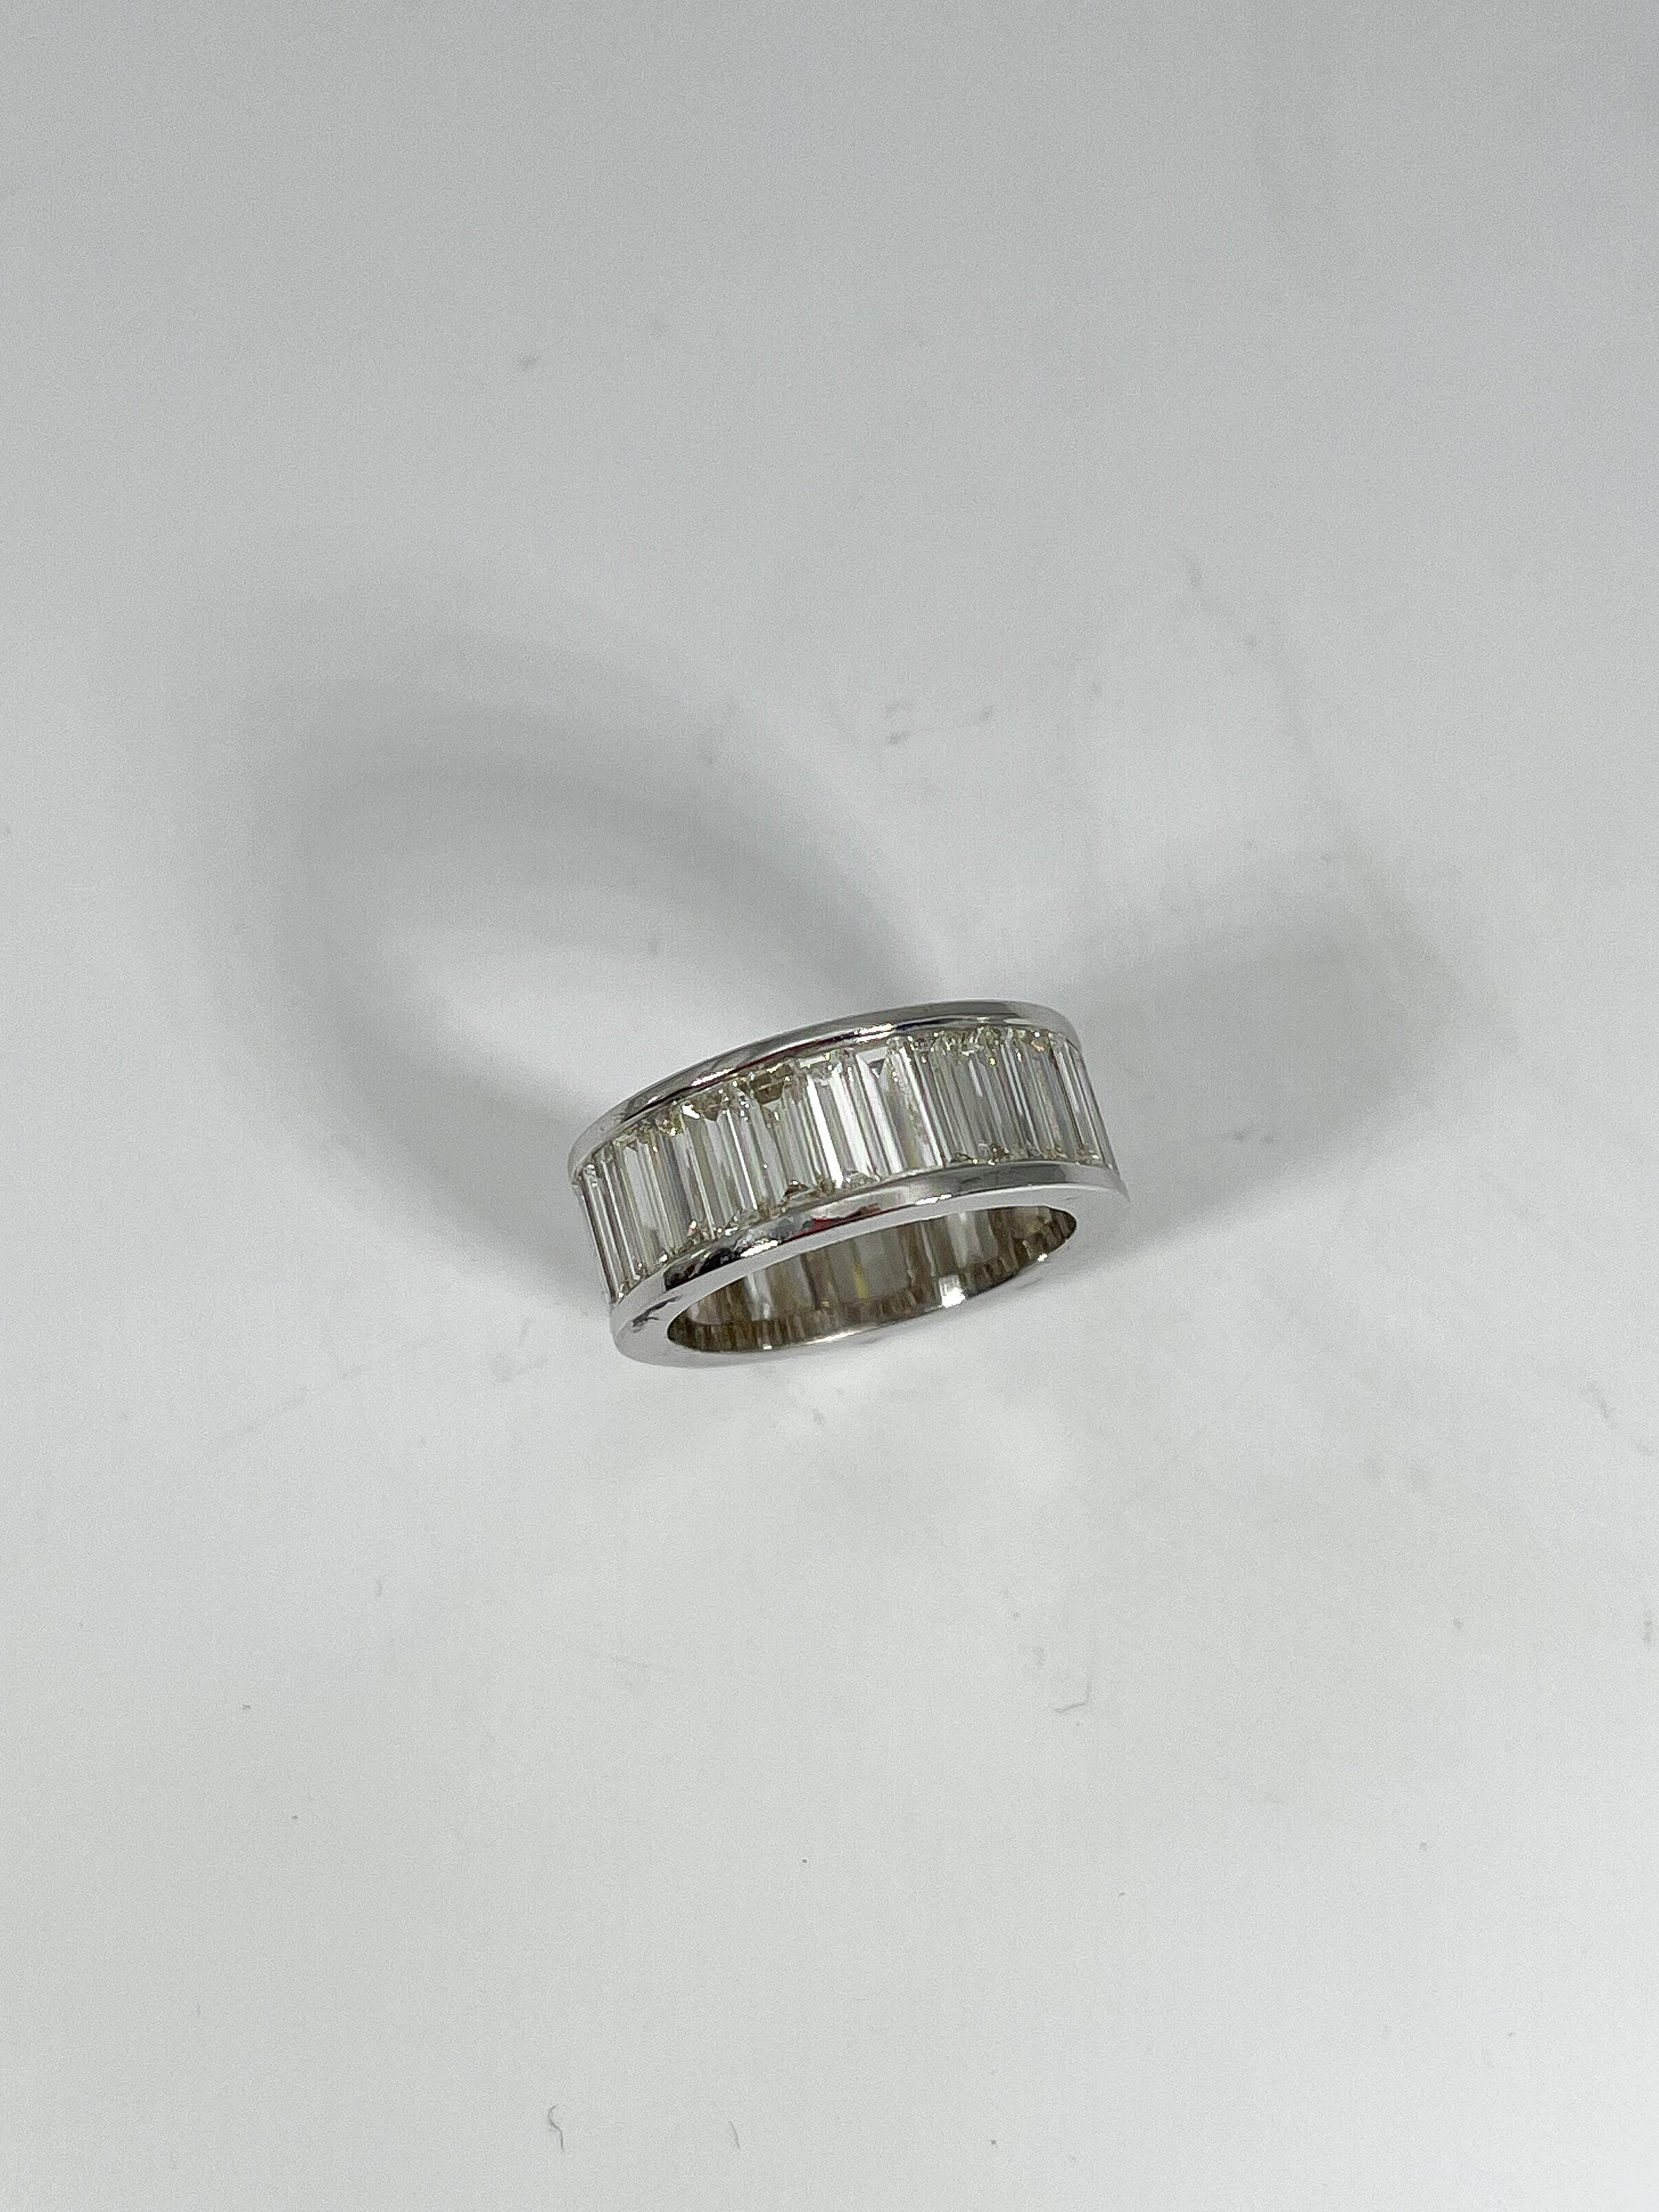 18k white gold eternity band, each stone is an emerald cut diamond equaling a total CTW of 8. All diamonds are VS2 G color. Ring is a size 6, the width measures 7.8 mm, and has a total weight of 6.95 grams. 